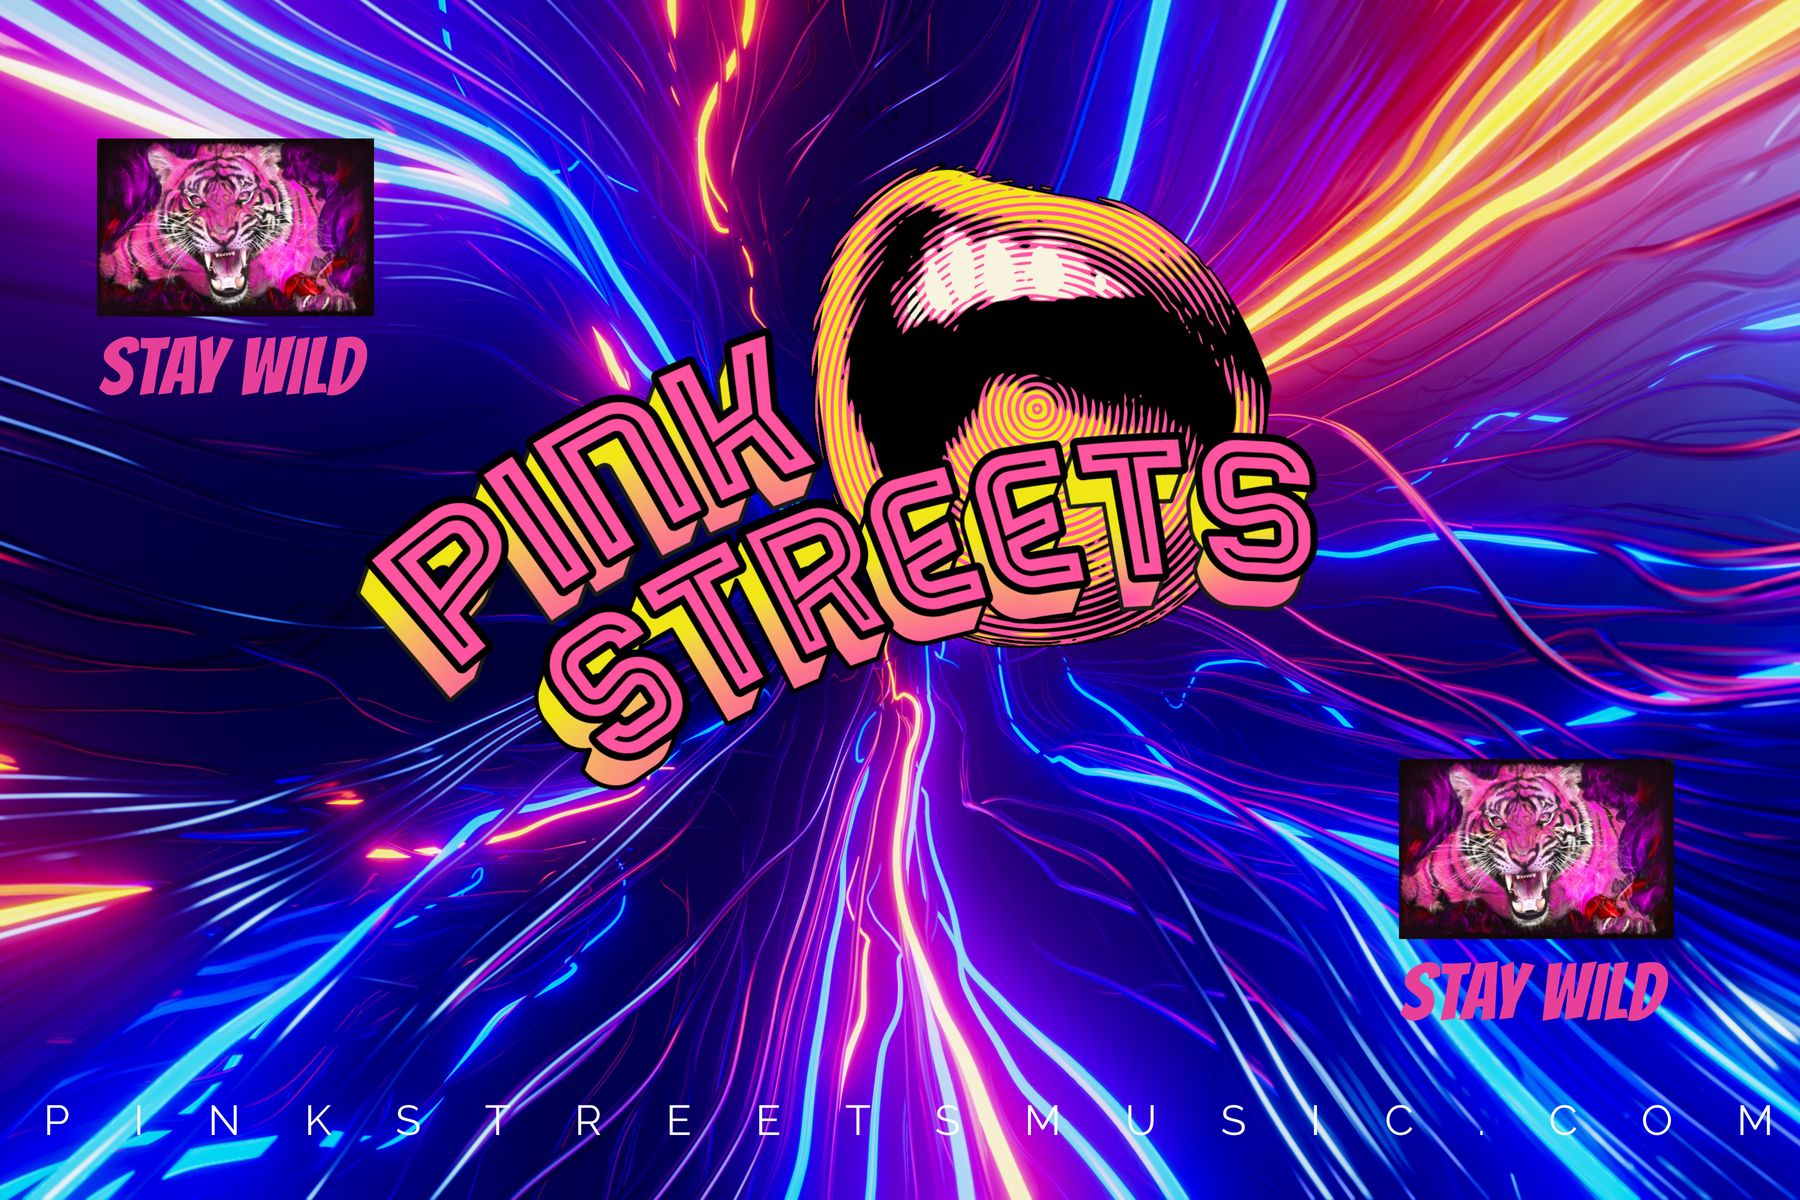 Streets - Pink Store Music